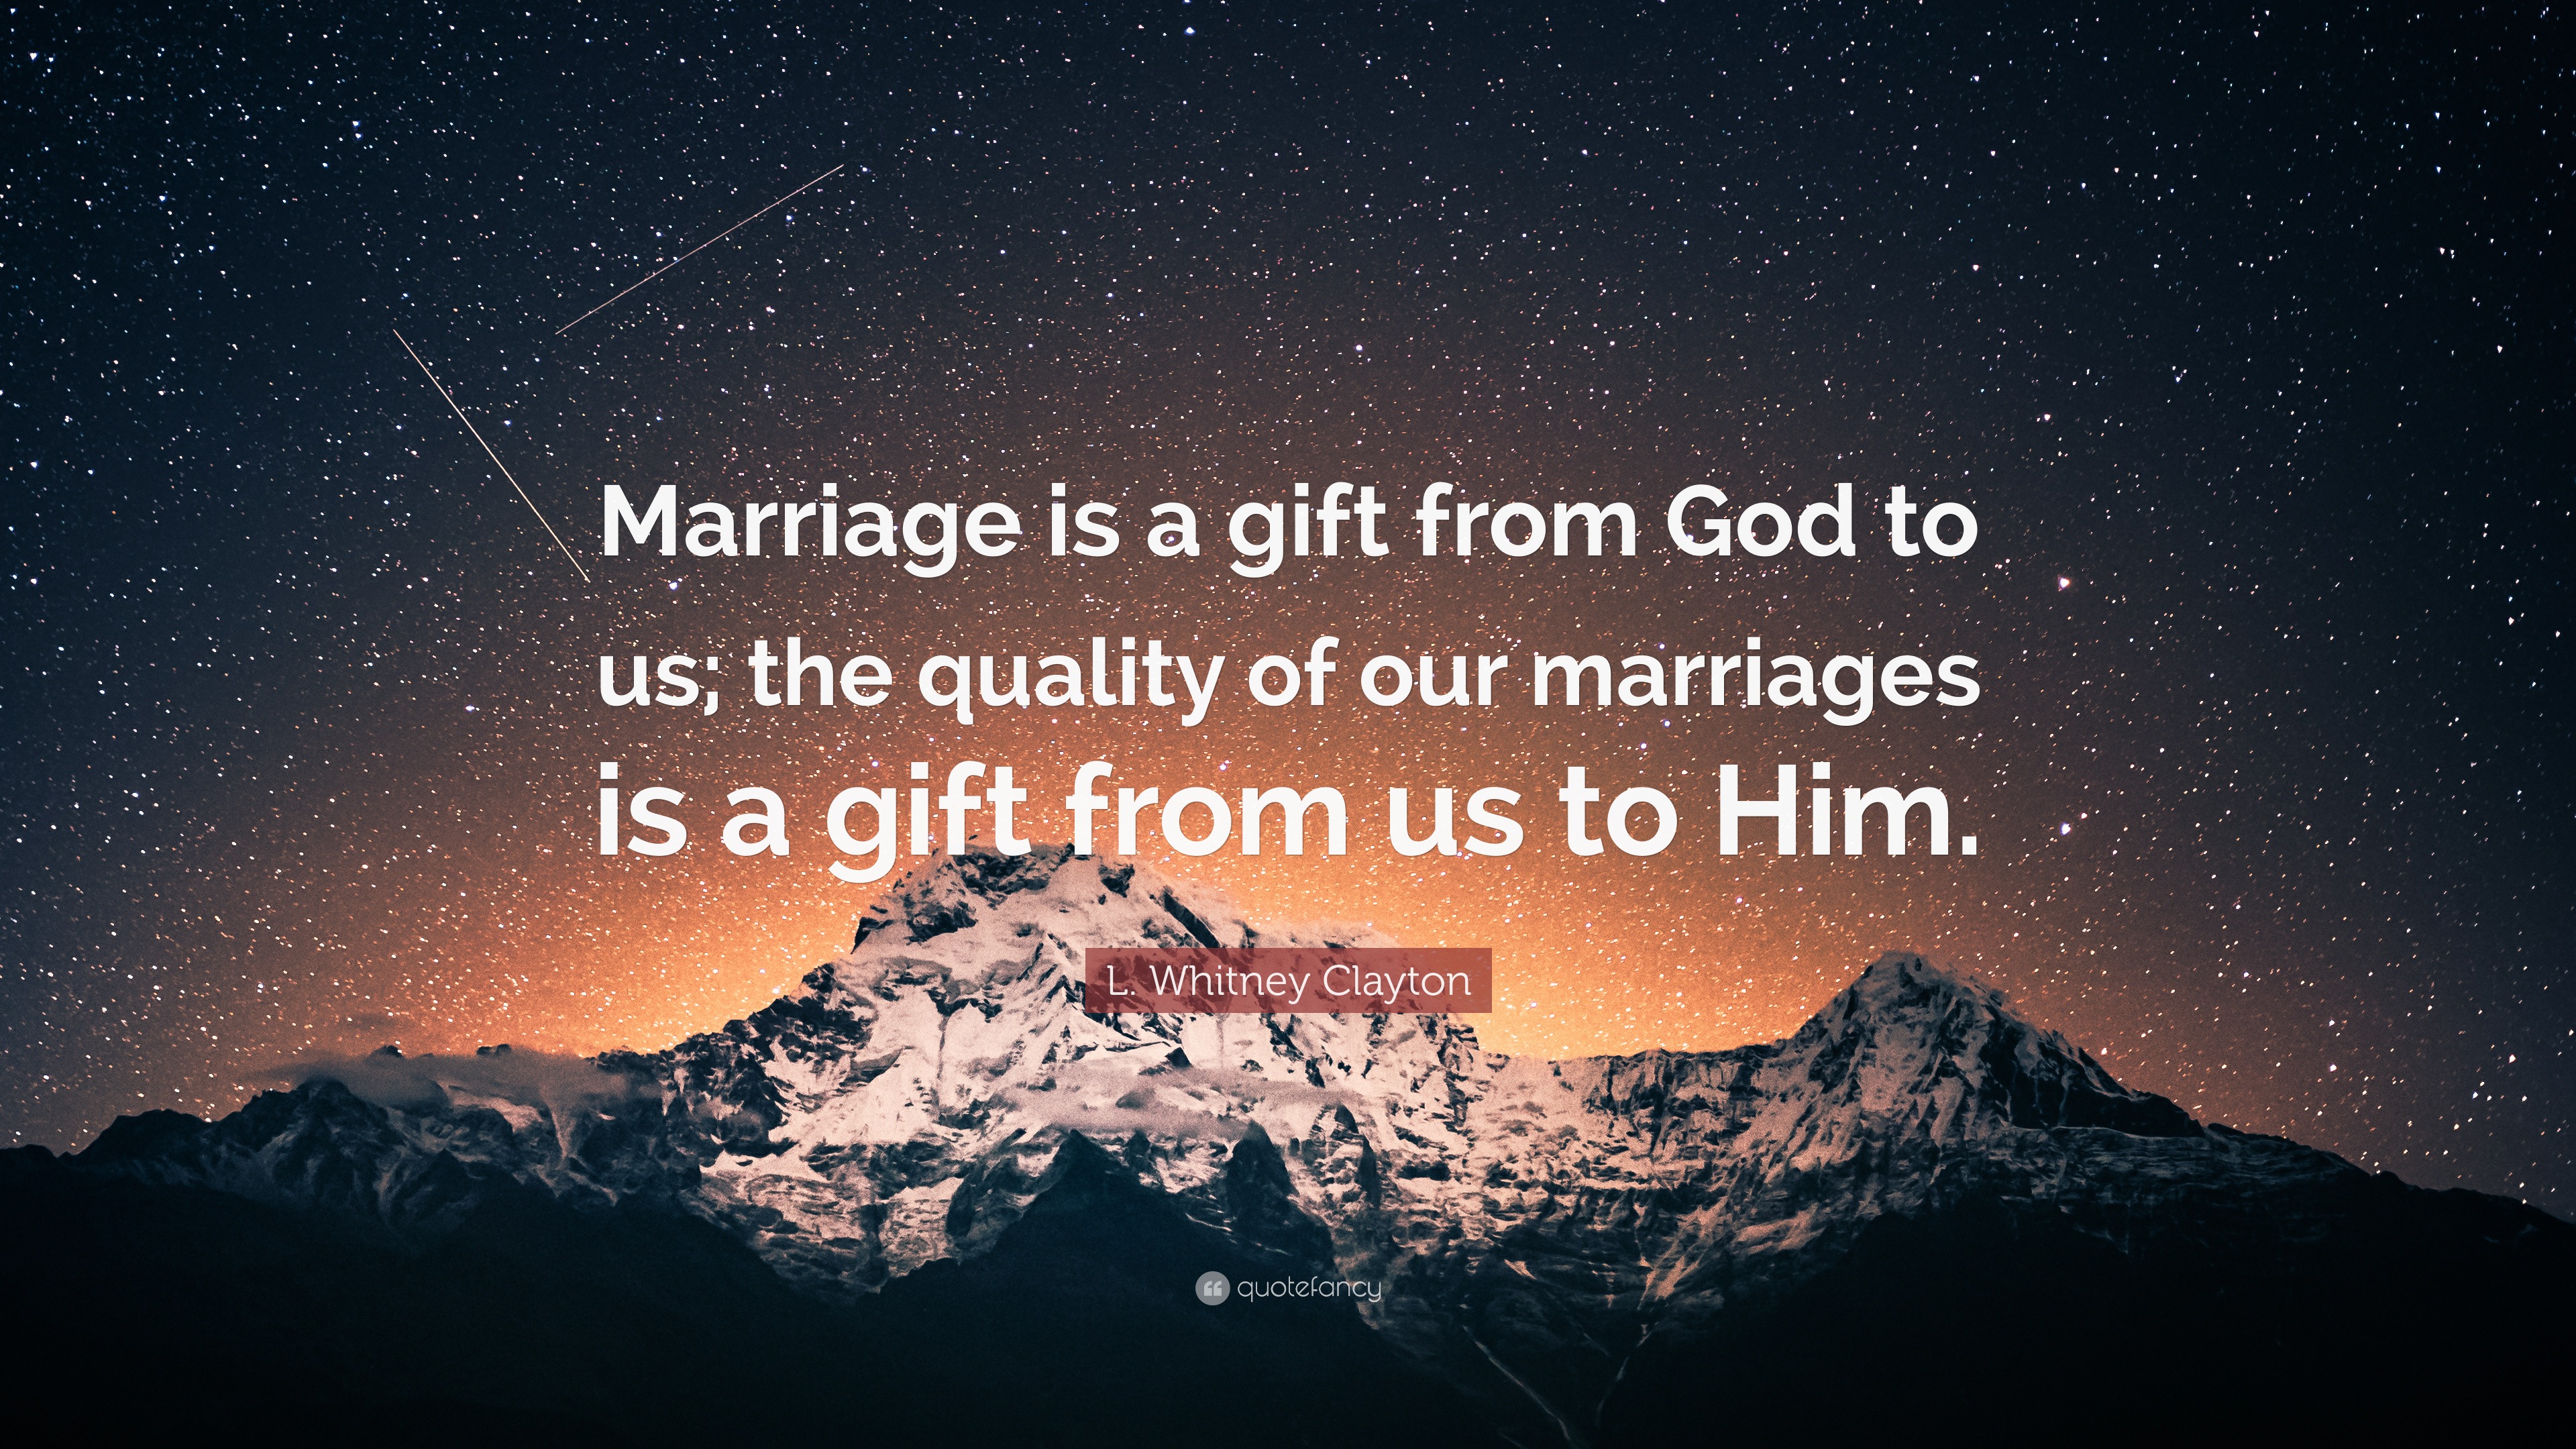 Marriage is a gift from God to us. The quality of our marriage is our gift